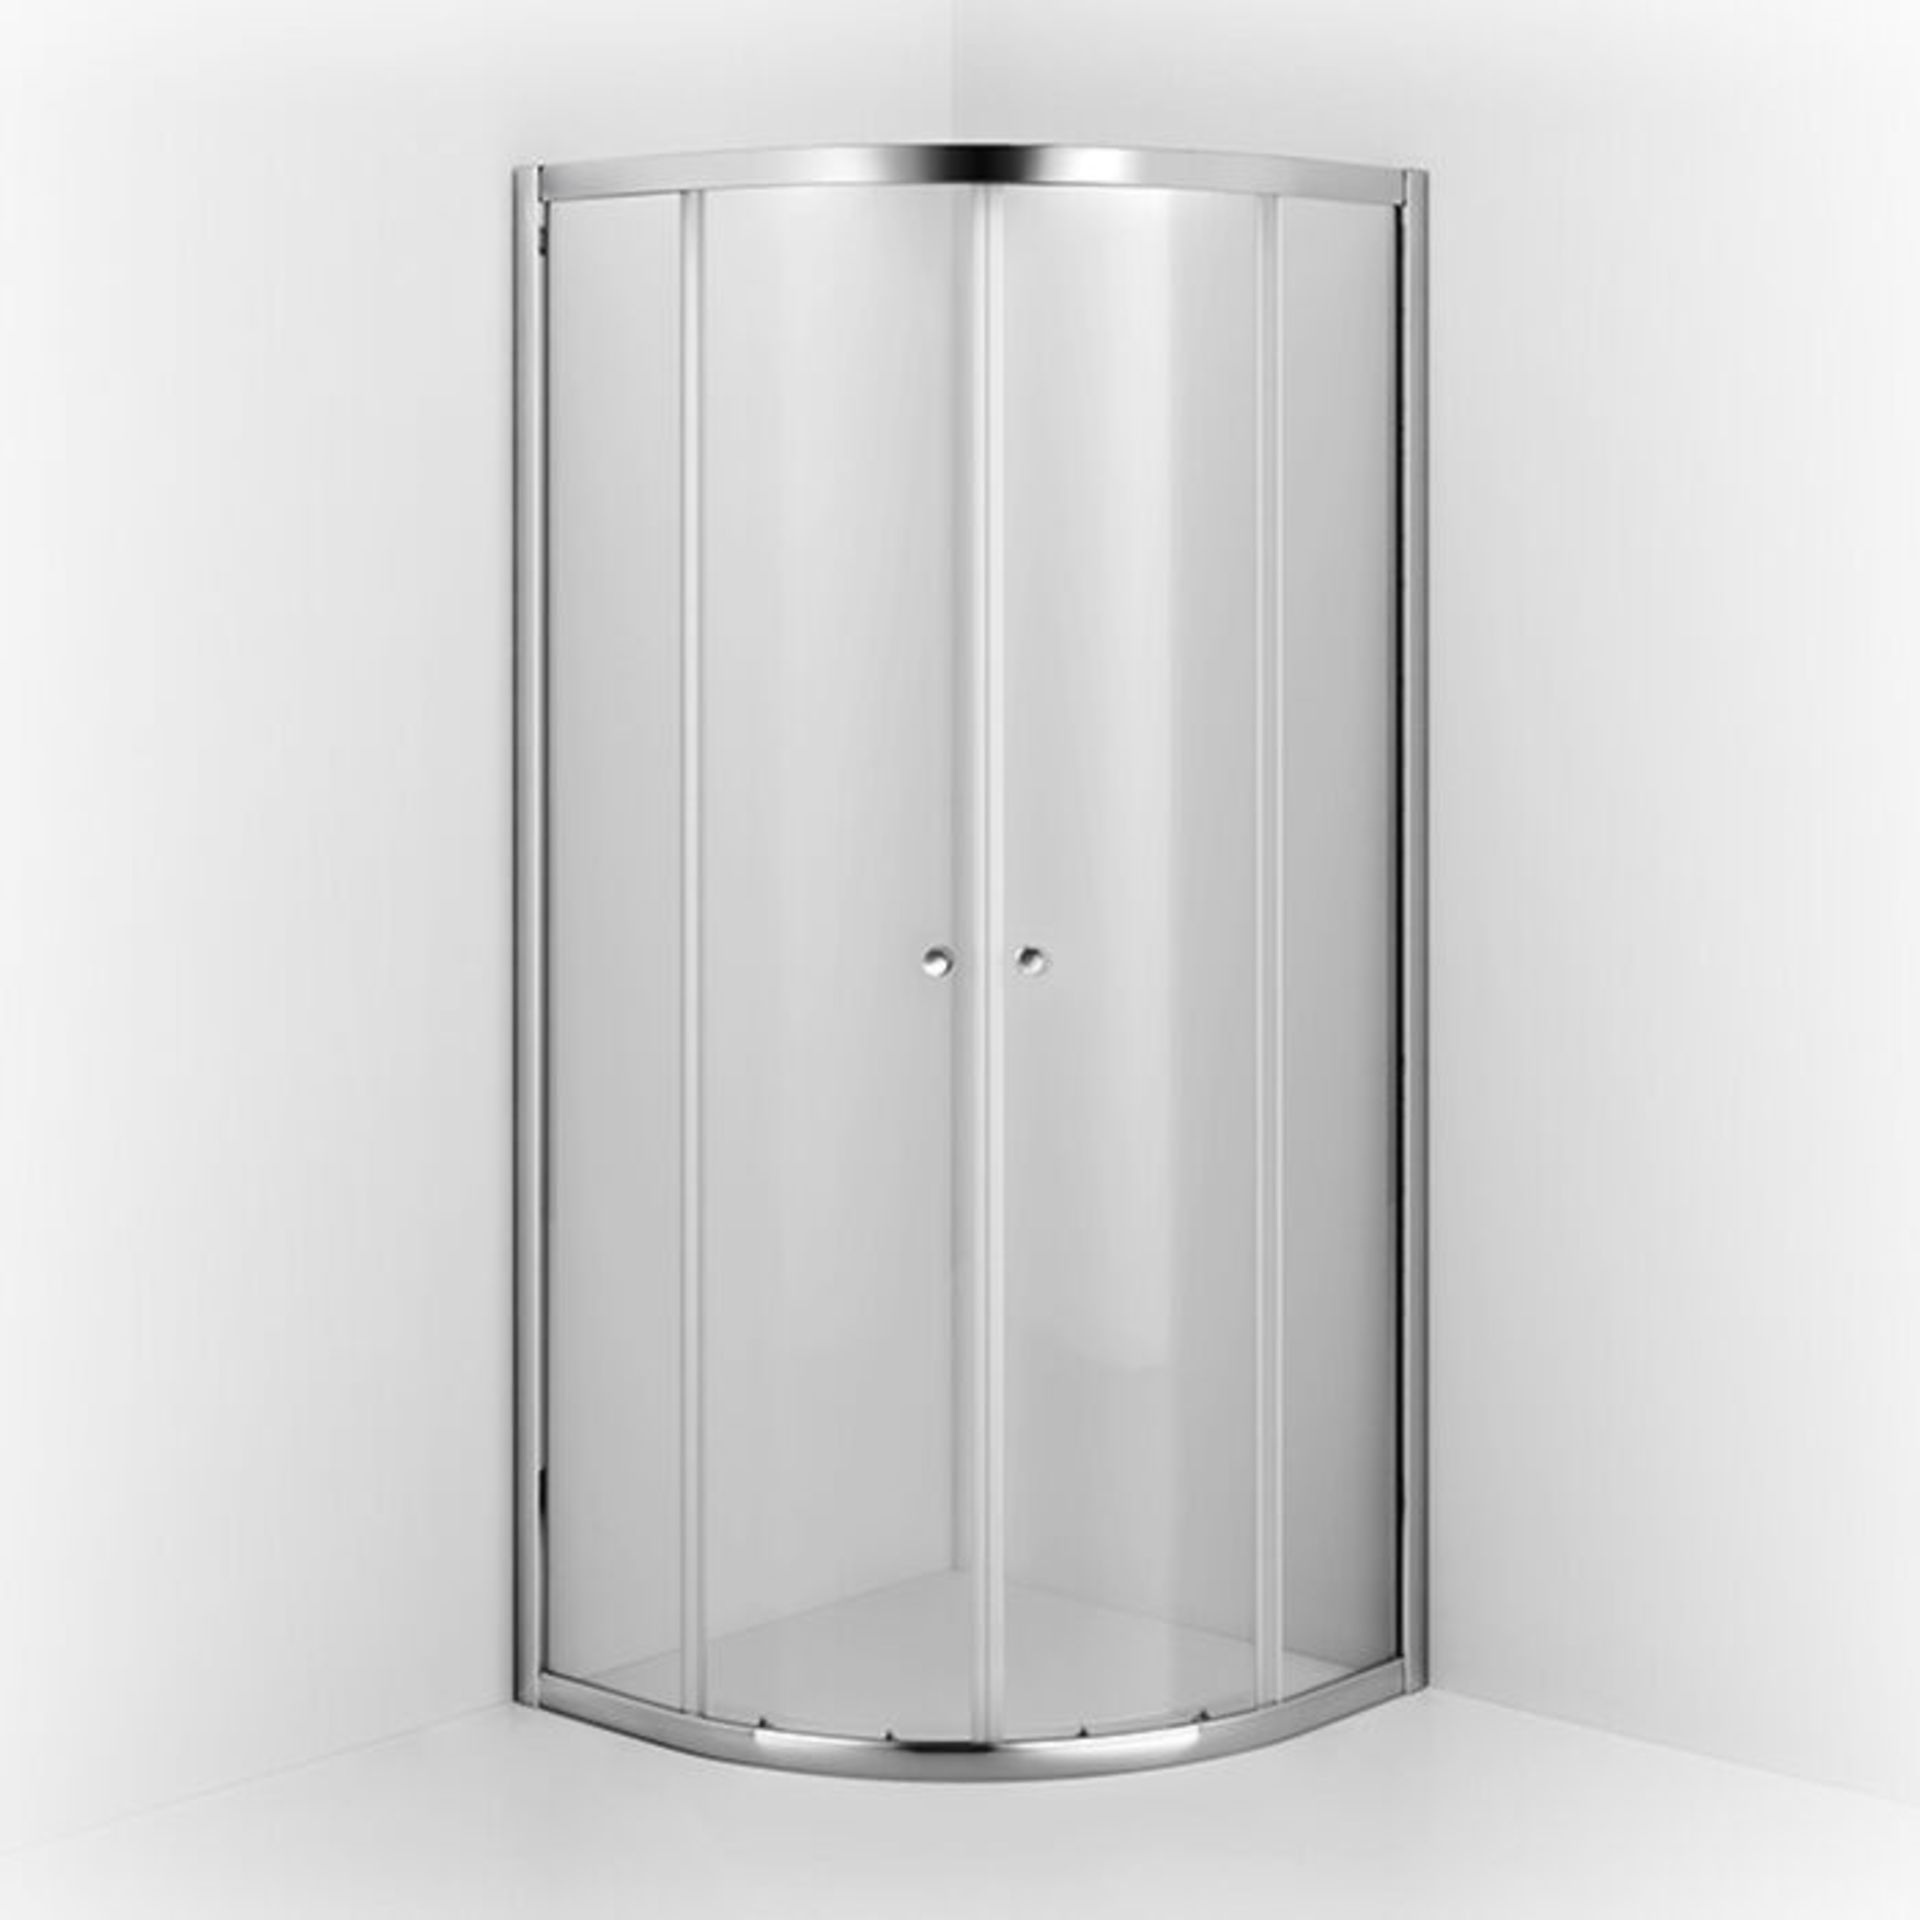 (H98) 800x800mm Quadrant Shower Enclosure. RRP £296.99. constructed of 4mm lightweight safet... - Image 2 of 2